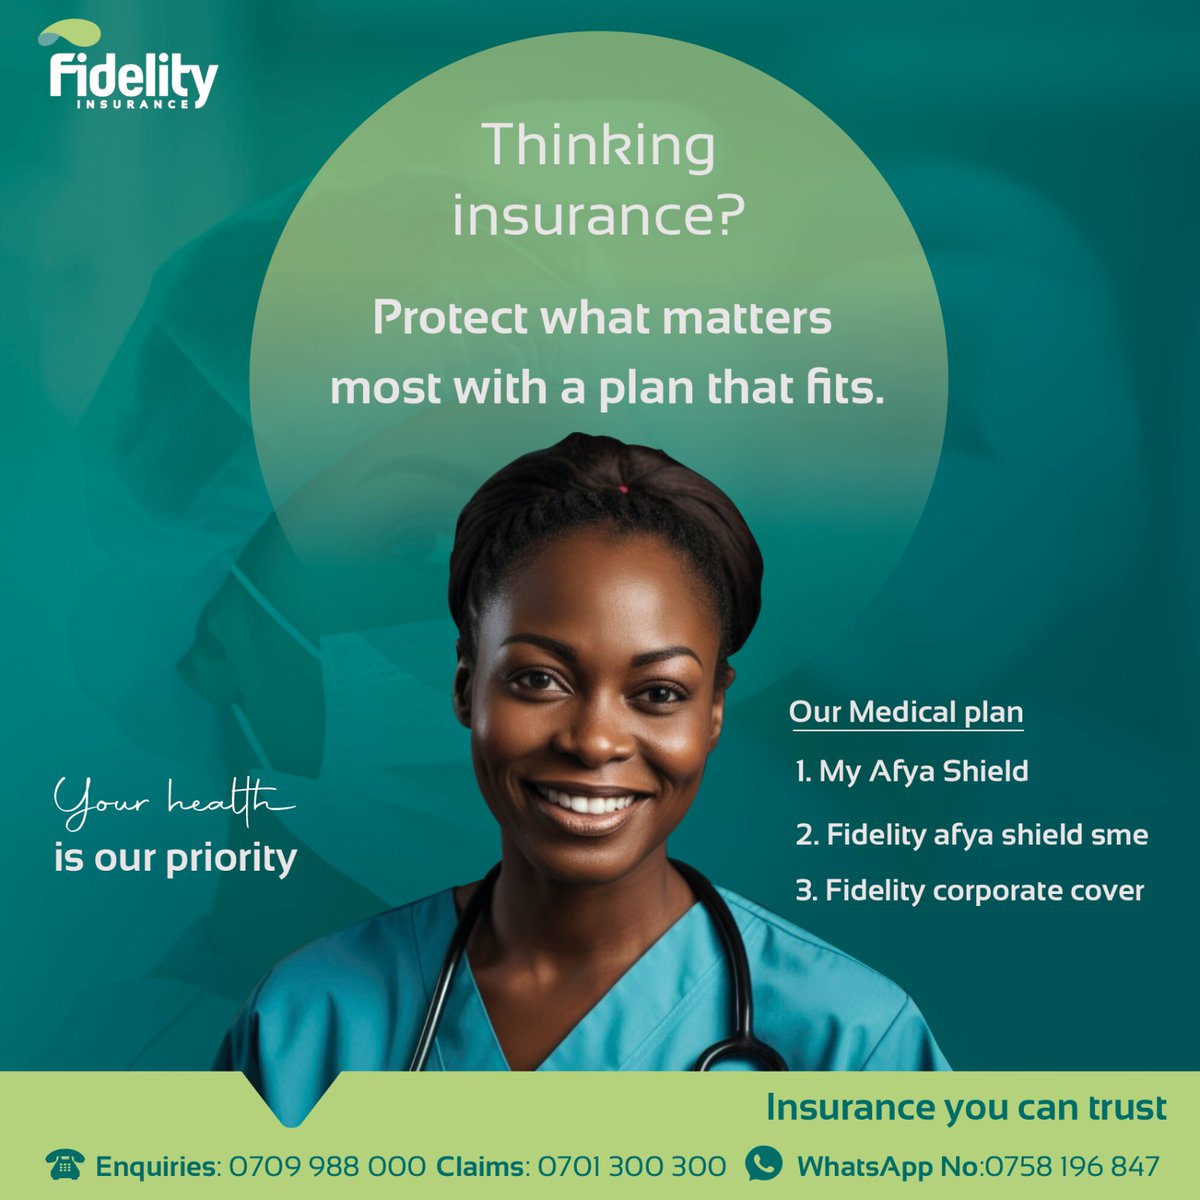 Protect your family with our quality medical insurance.We offer affordable plans tailored to your needs. Chat with us on whatsapp on 0758196847 and find a plan that you need.
#fidelityinsurance #insuranceyoucantrust #medicalinsurance #insurance